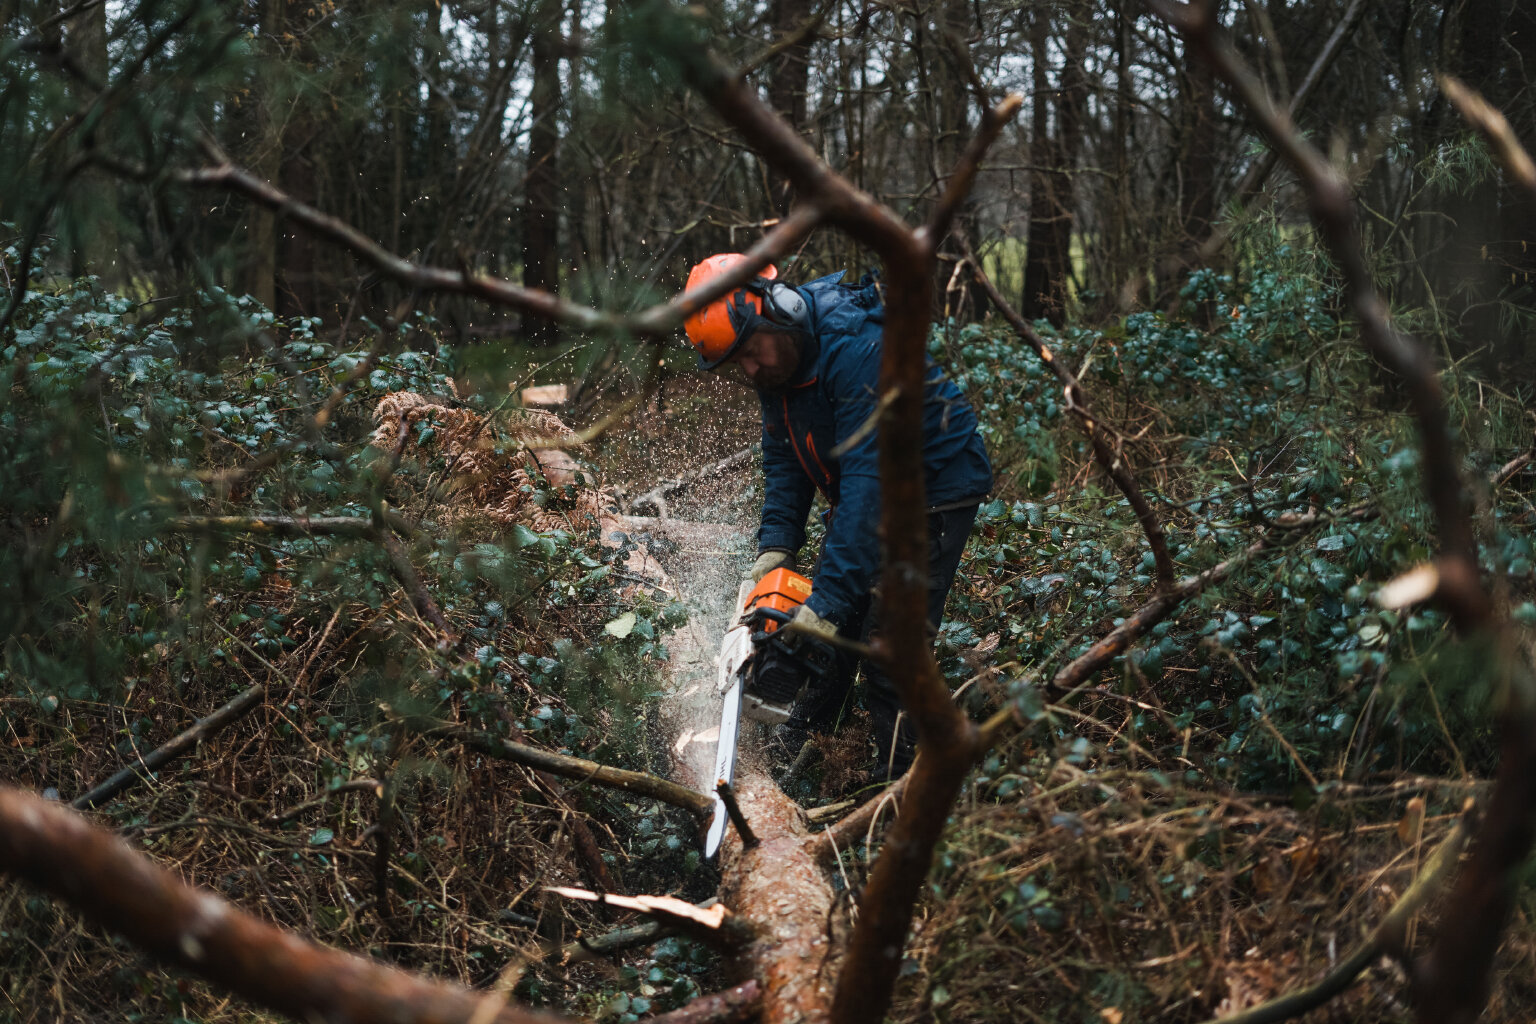  After felling, the limbs are snedded and the main trunks cut to 3 metre lengths ready for extraction. 